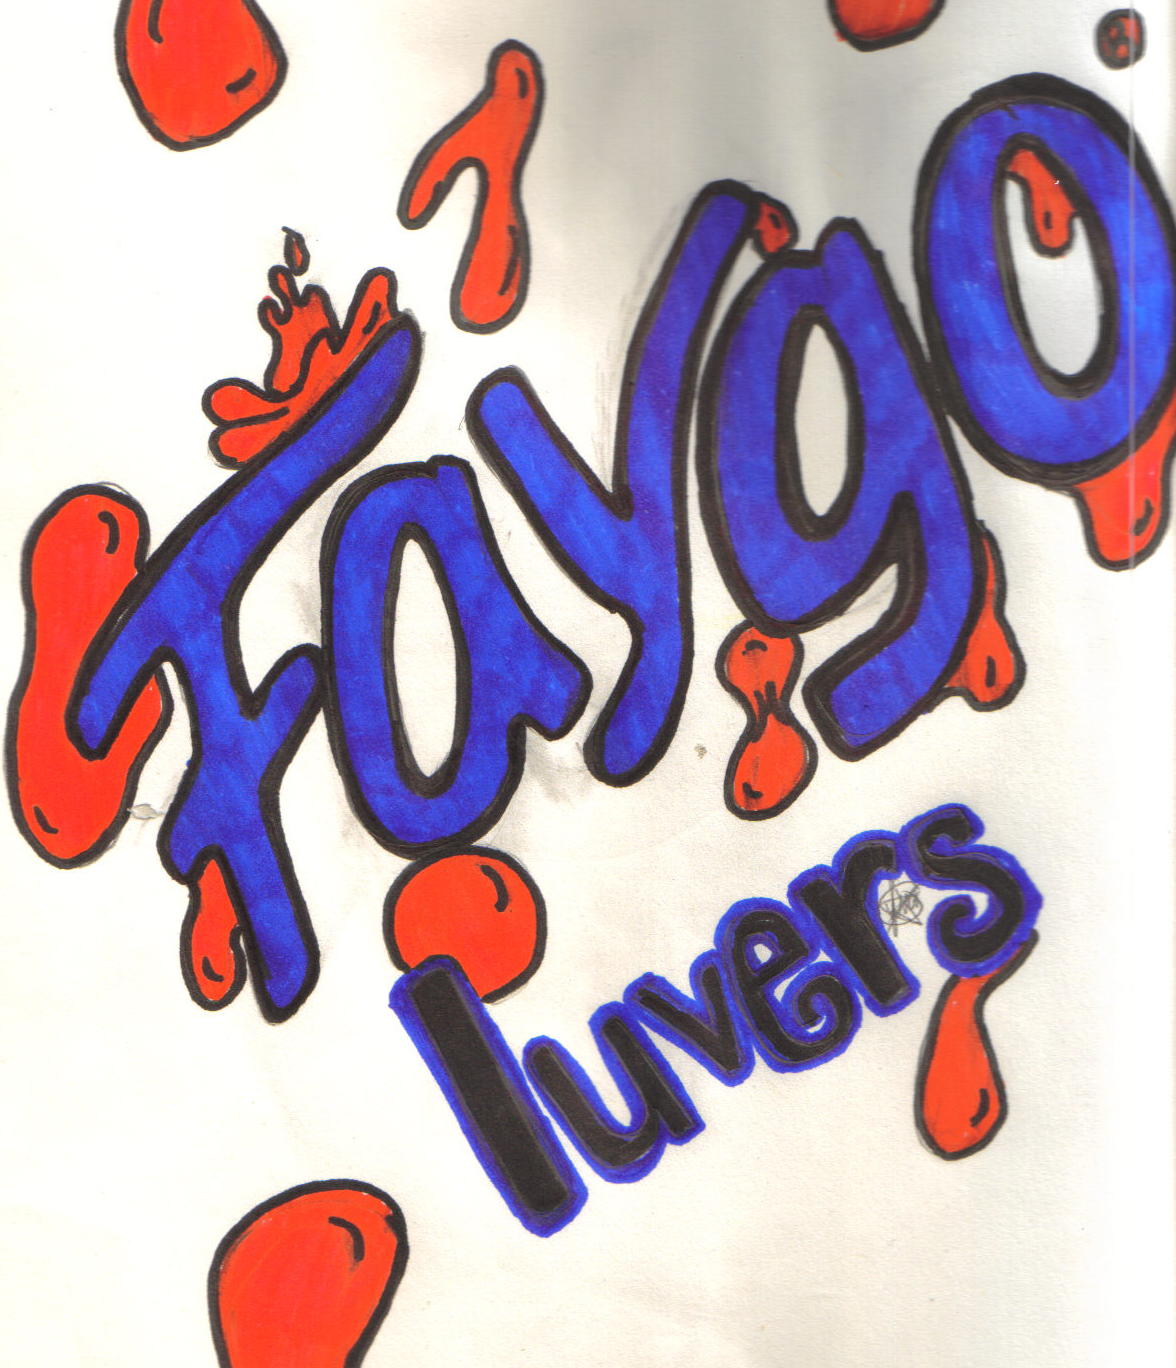 Faygo Luvers by juggakitty